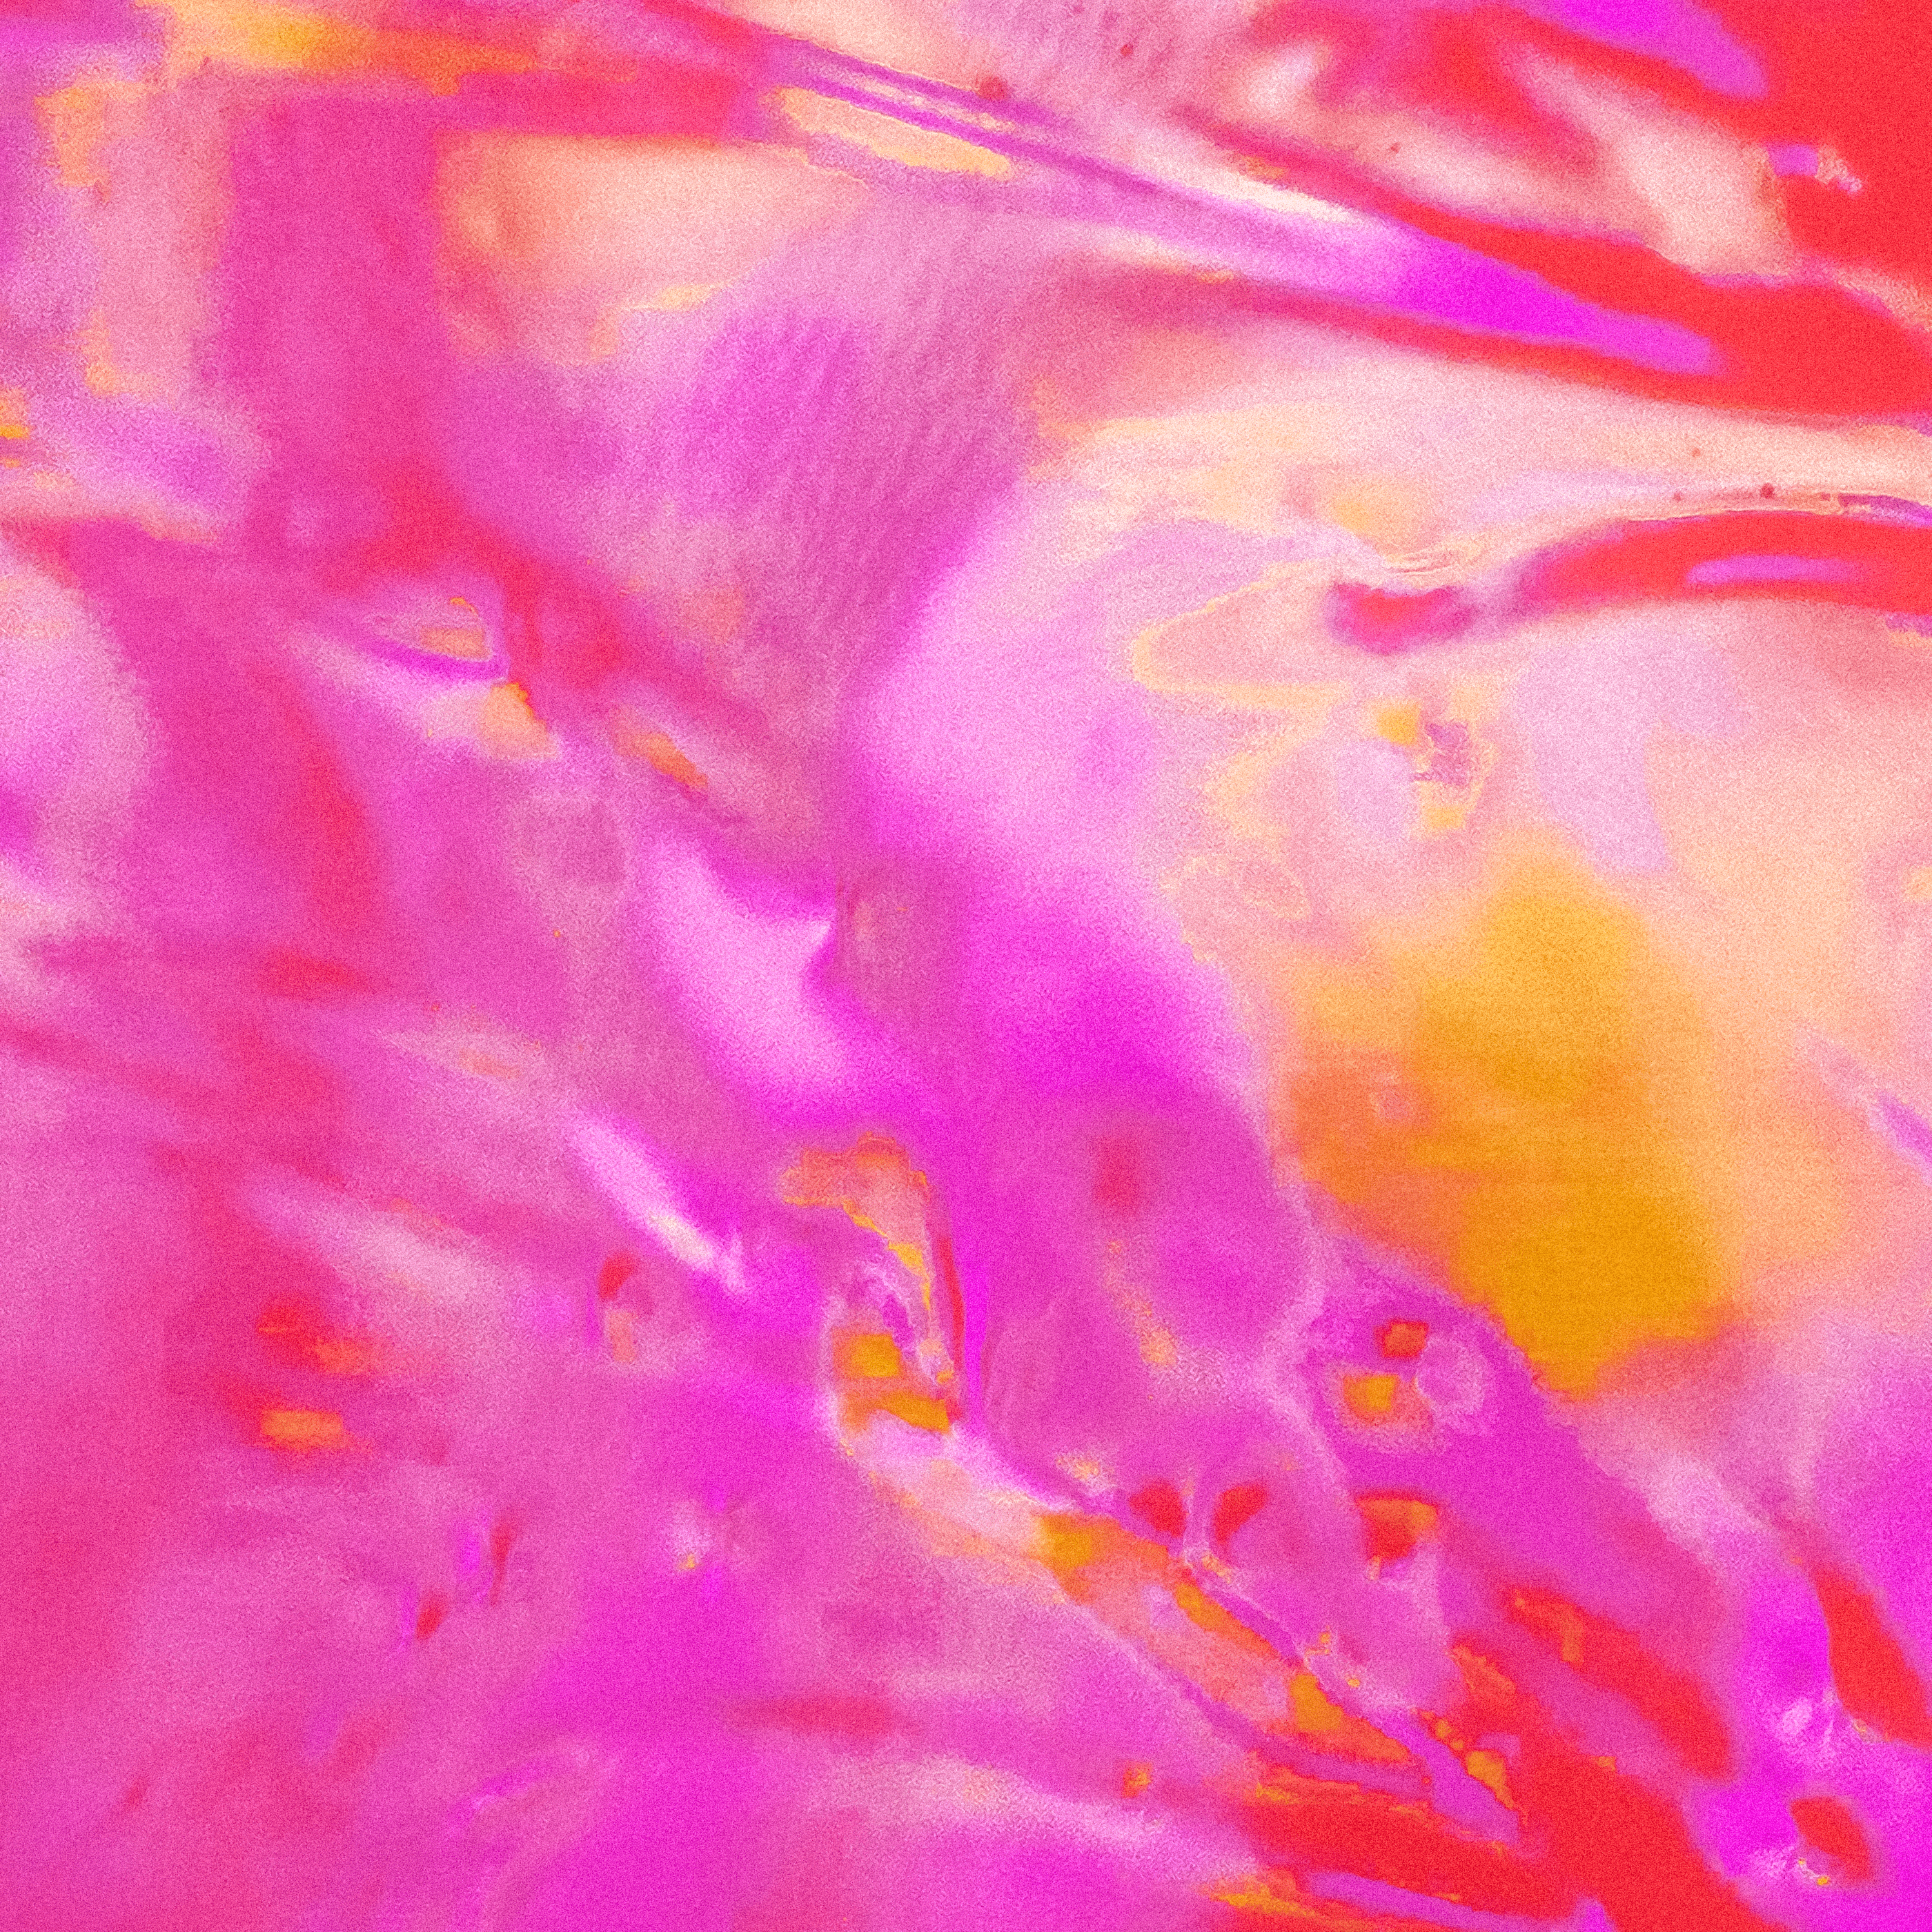 Cover art for slenderbodies's song: think